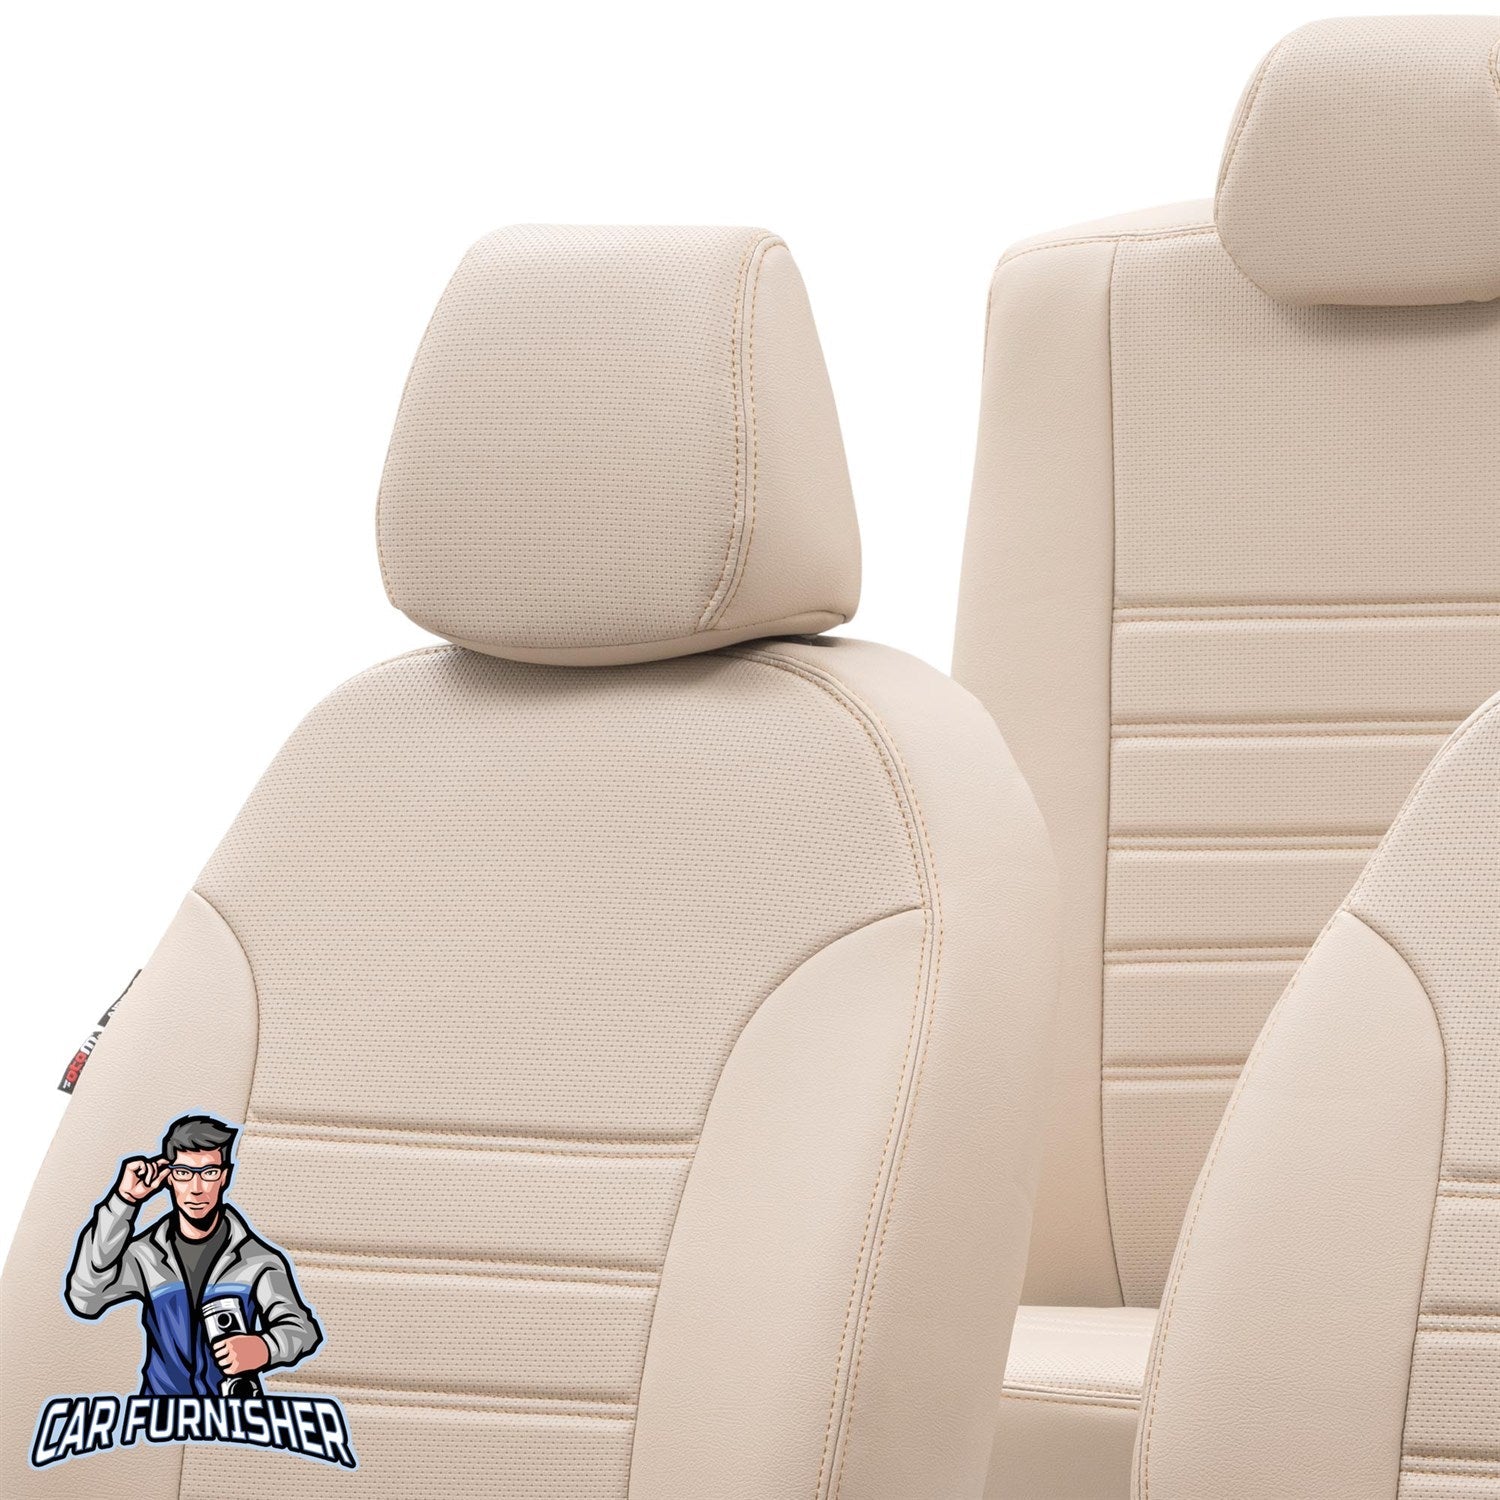 Kia Stonic Seat Covers New York Leather Design Beige Leather